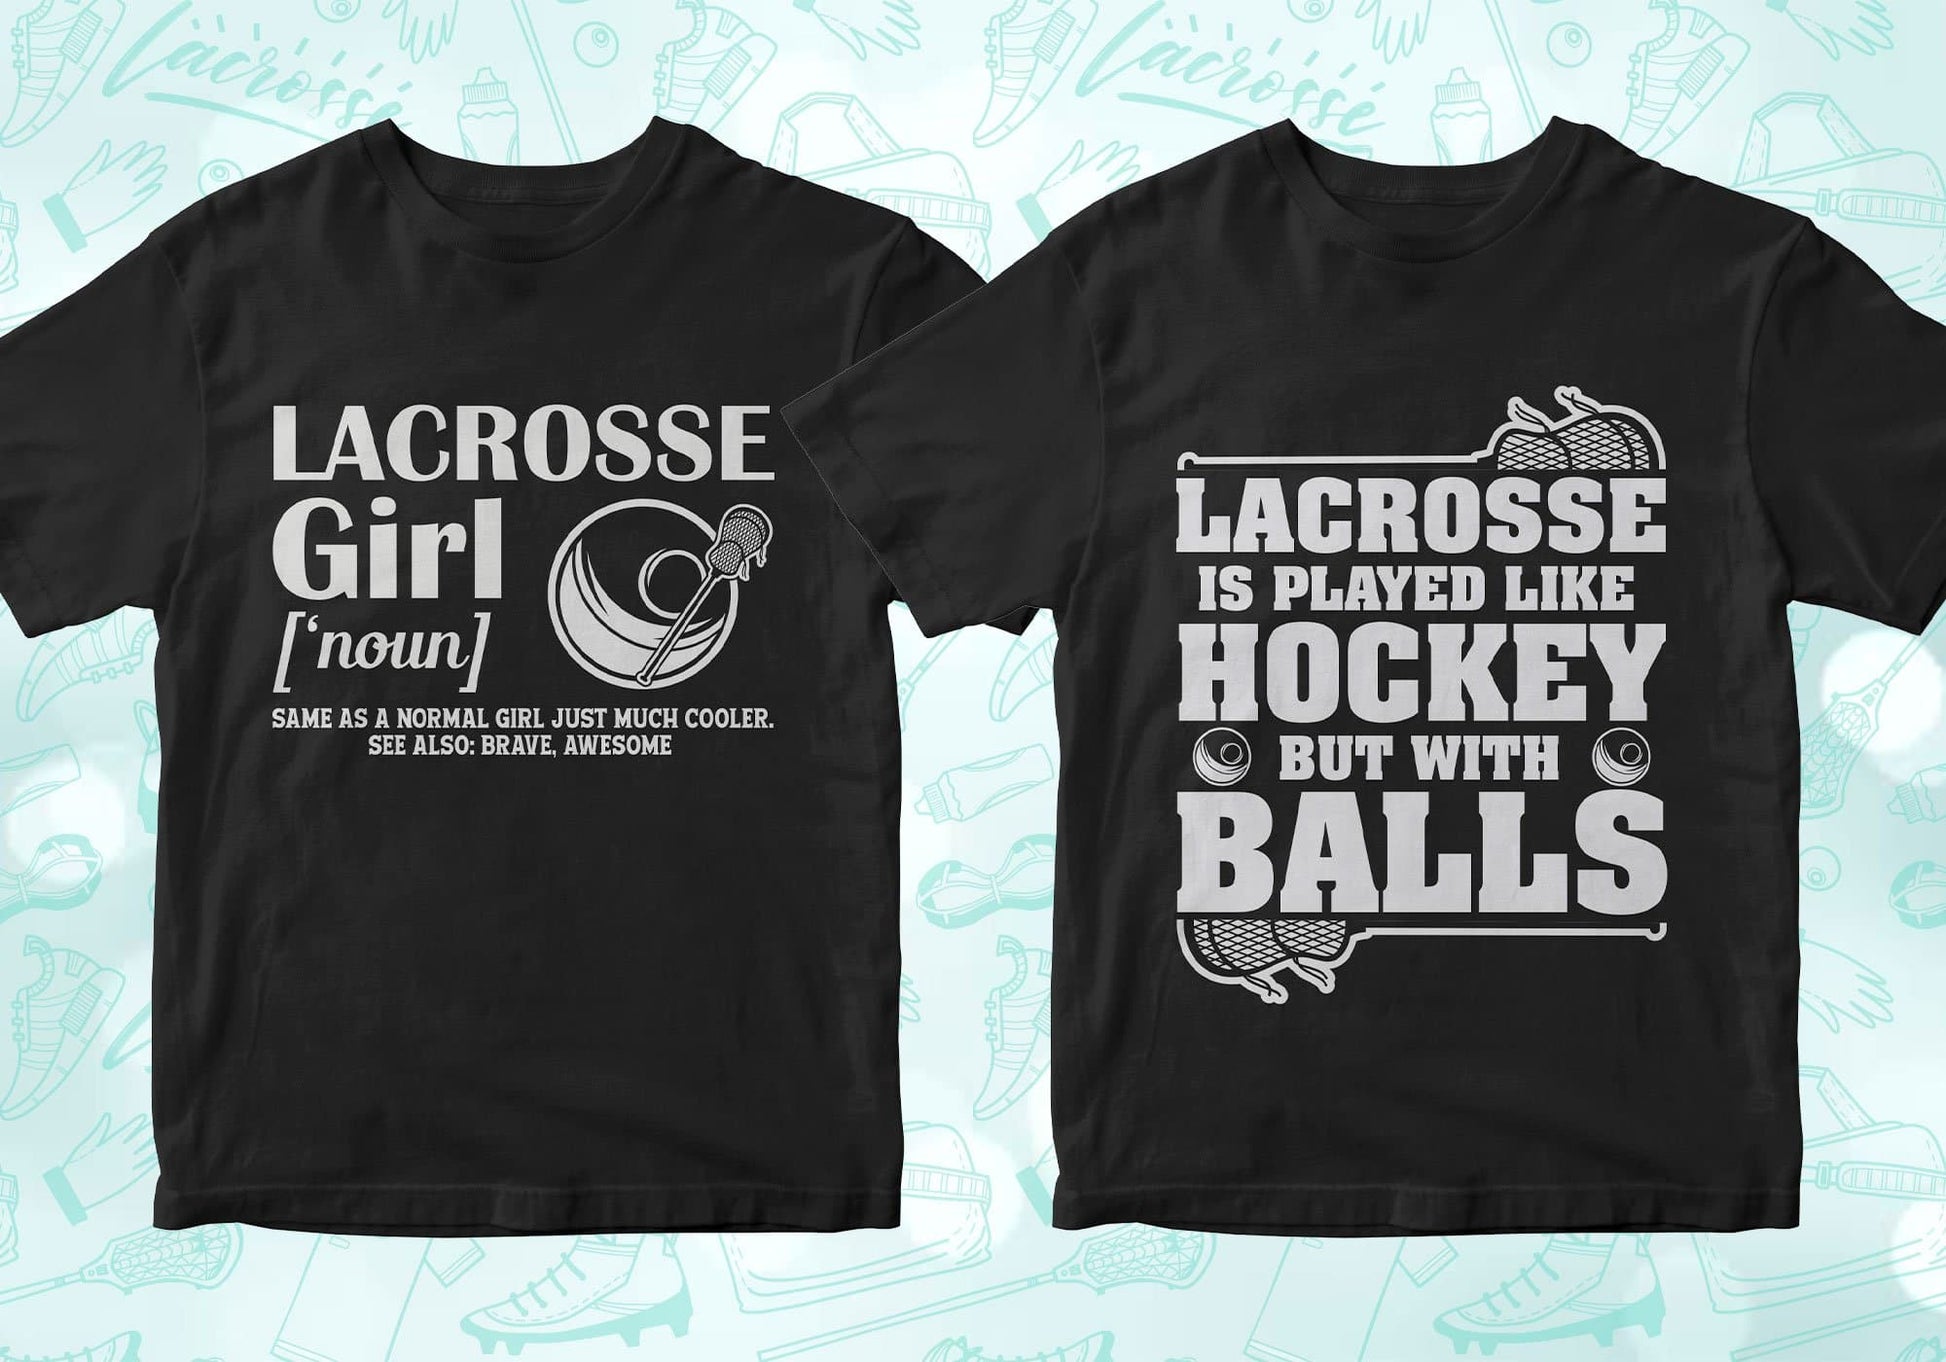 lacrosse girl definition, lacrosse is played like hockey but with balls, lacrosse shirts lacrosse tshirt lacrosse t shirts lacrosse shirt designs lacrosse graphic